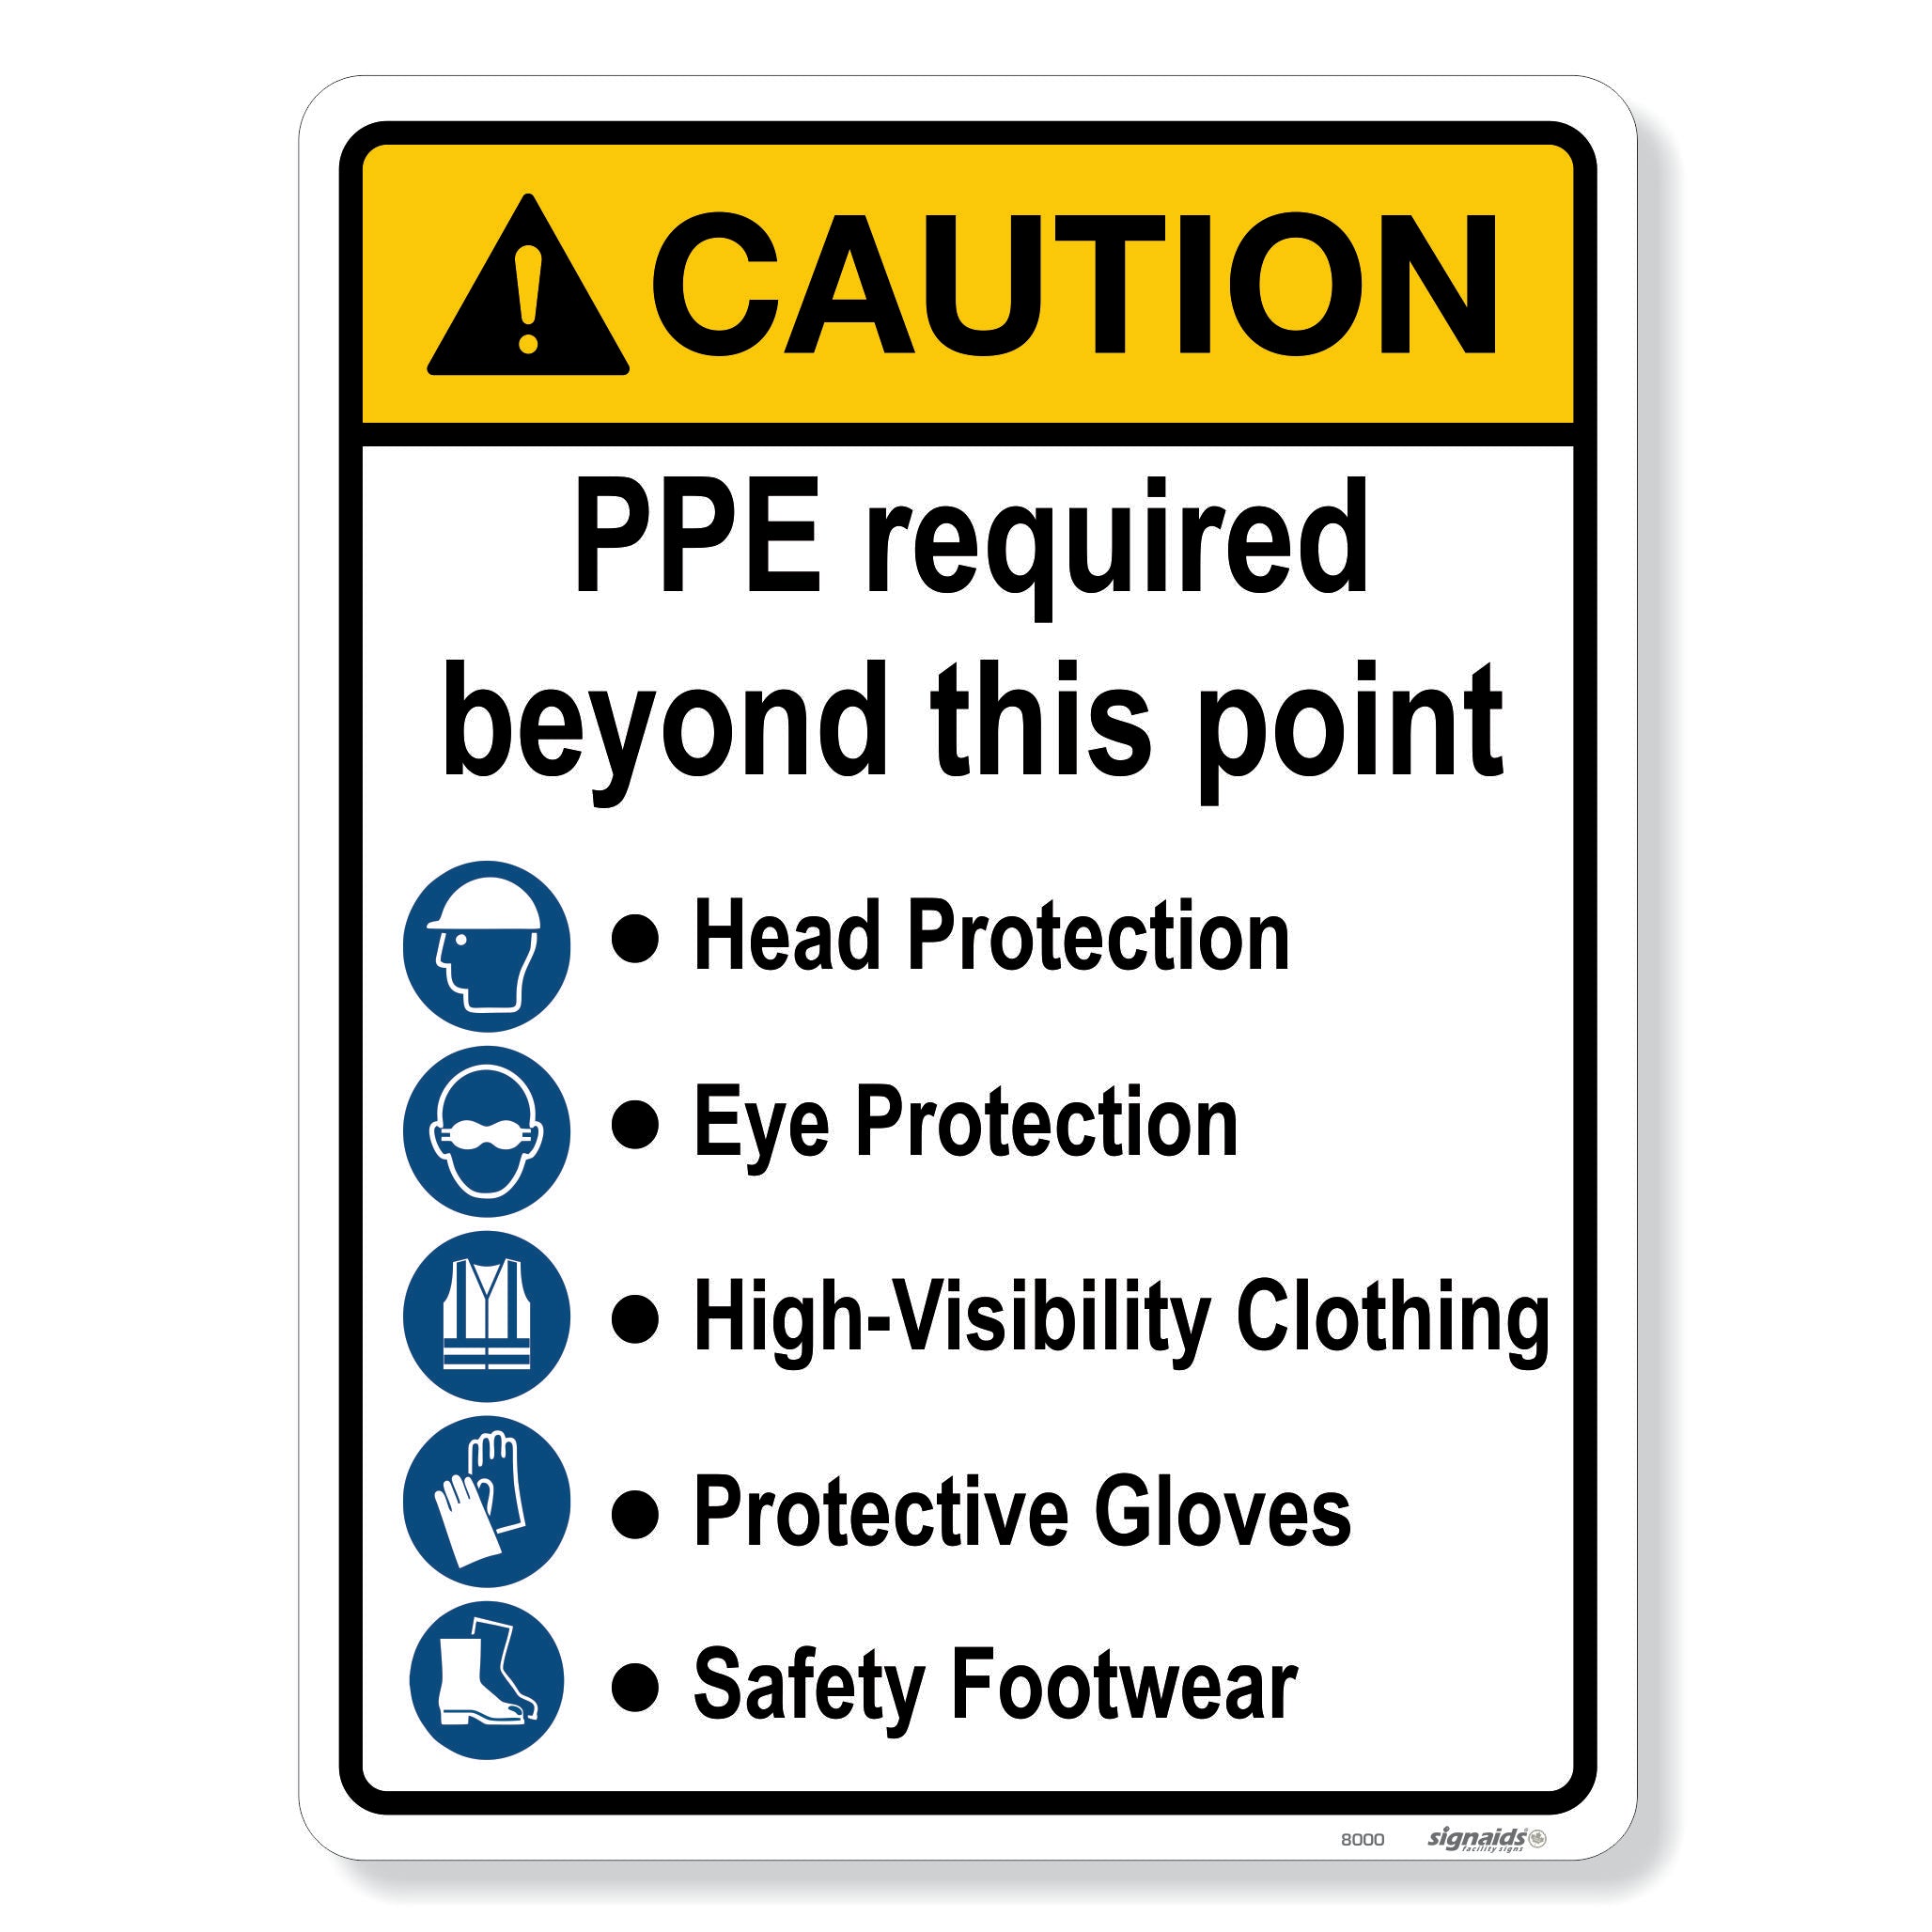 Caution- PPE required beyond this point